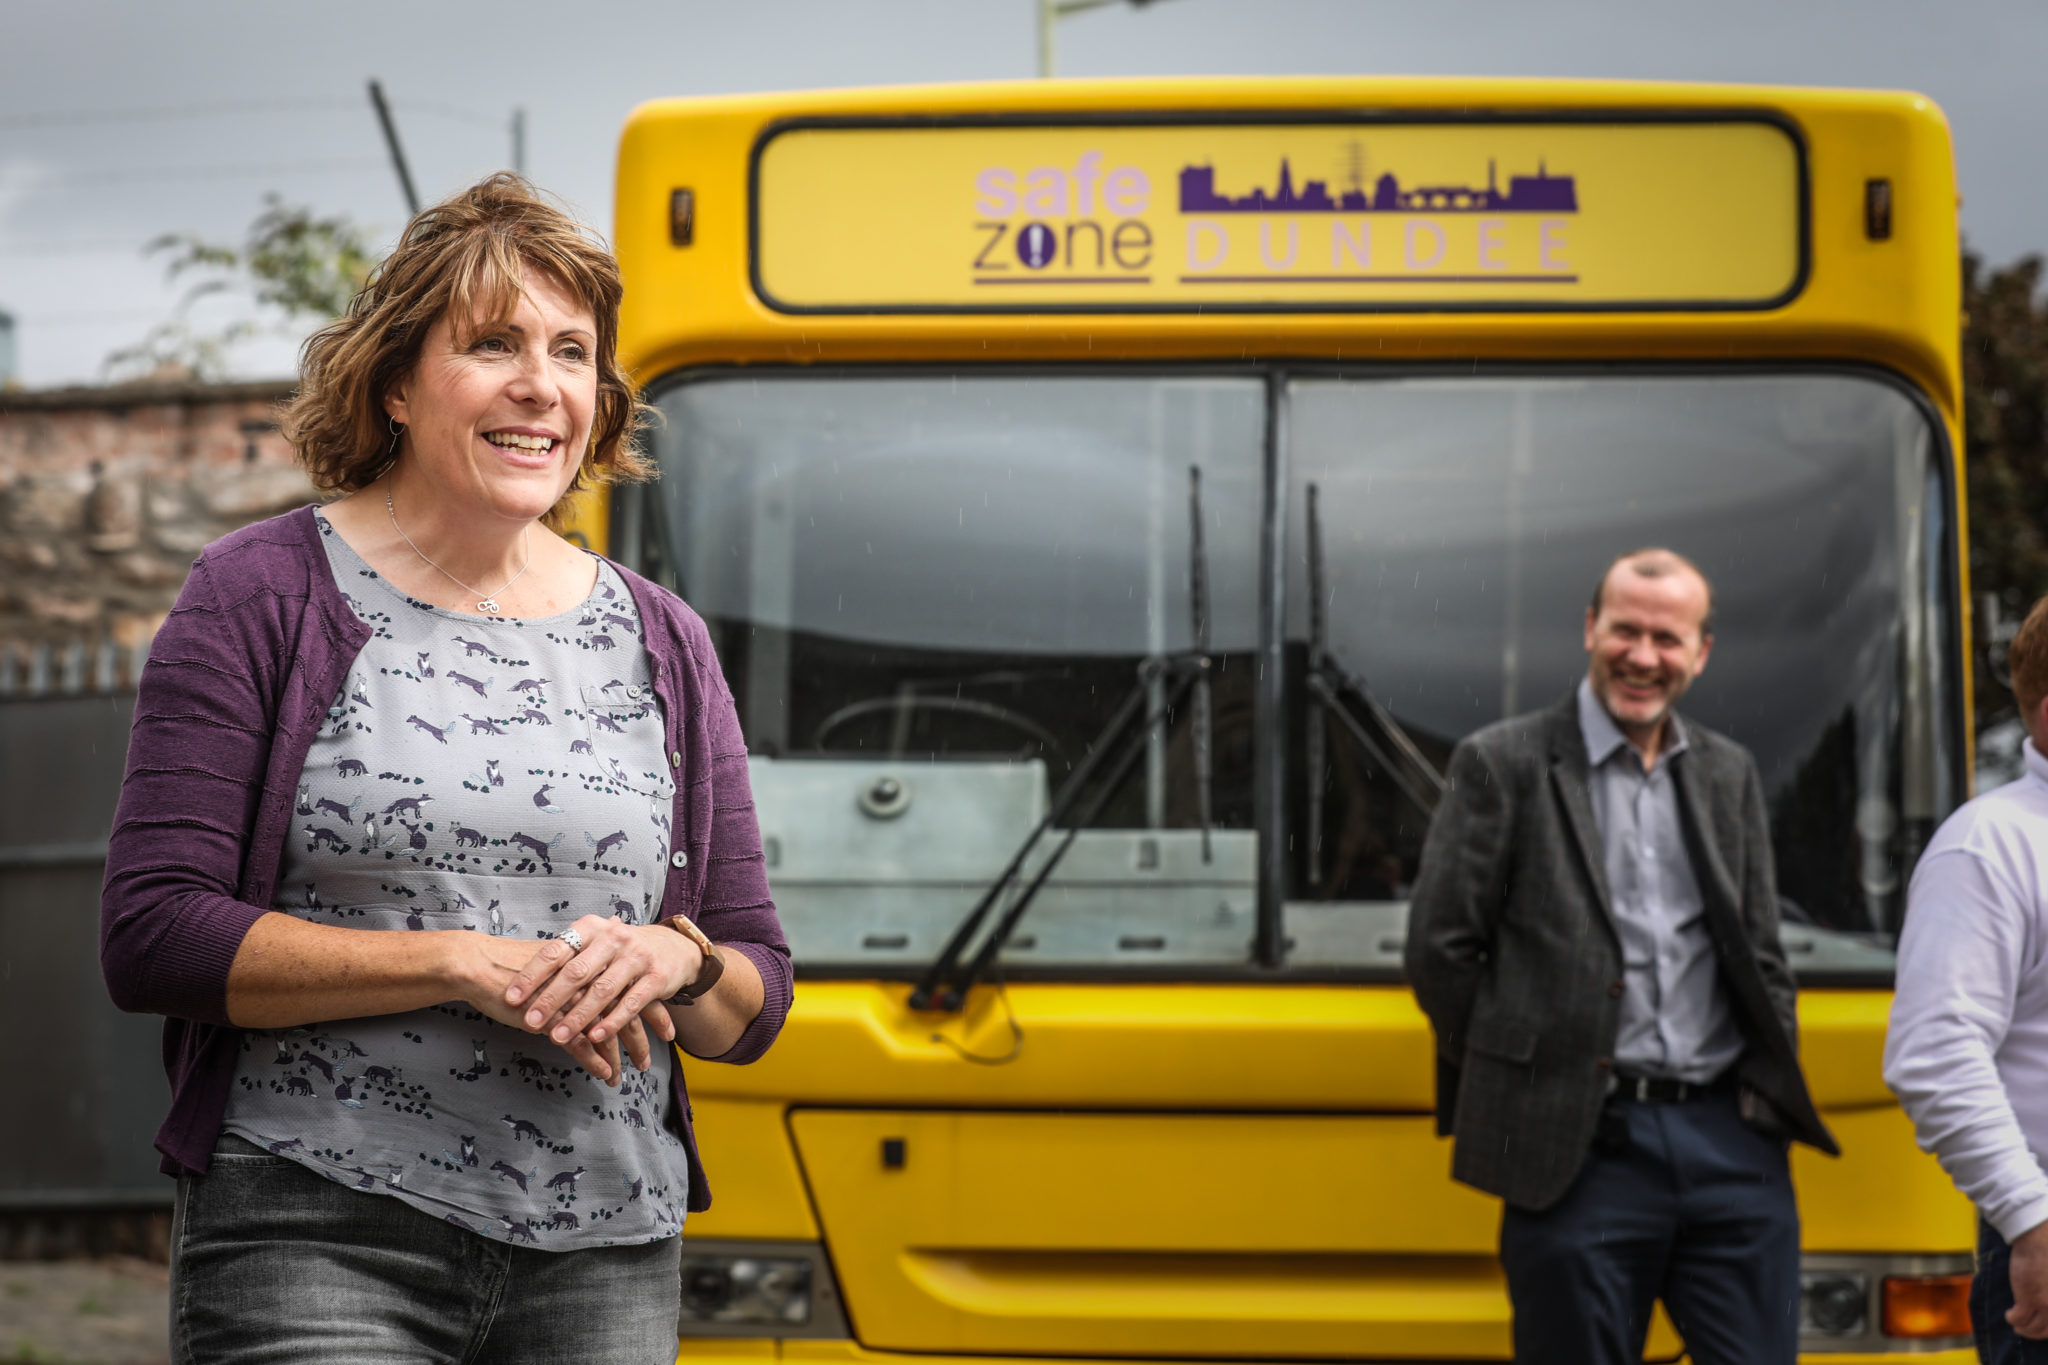 Tayside Council on Alcohol's chief executive Kathryn Baker at the SafeZone bus.